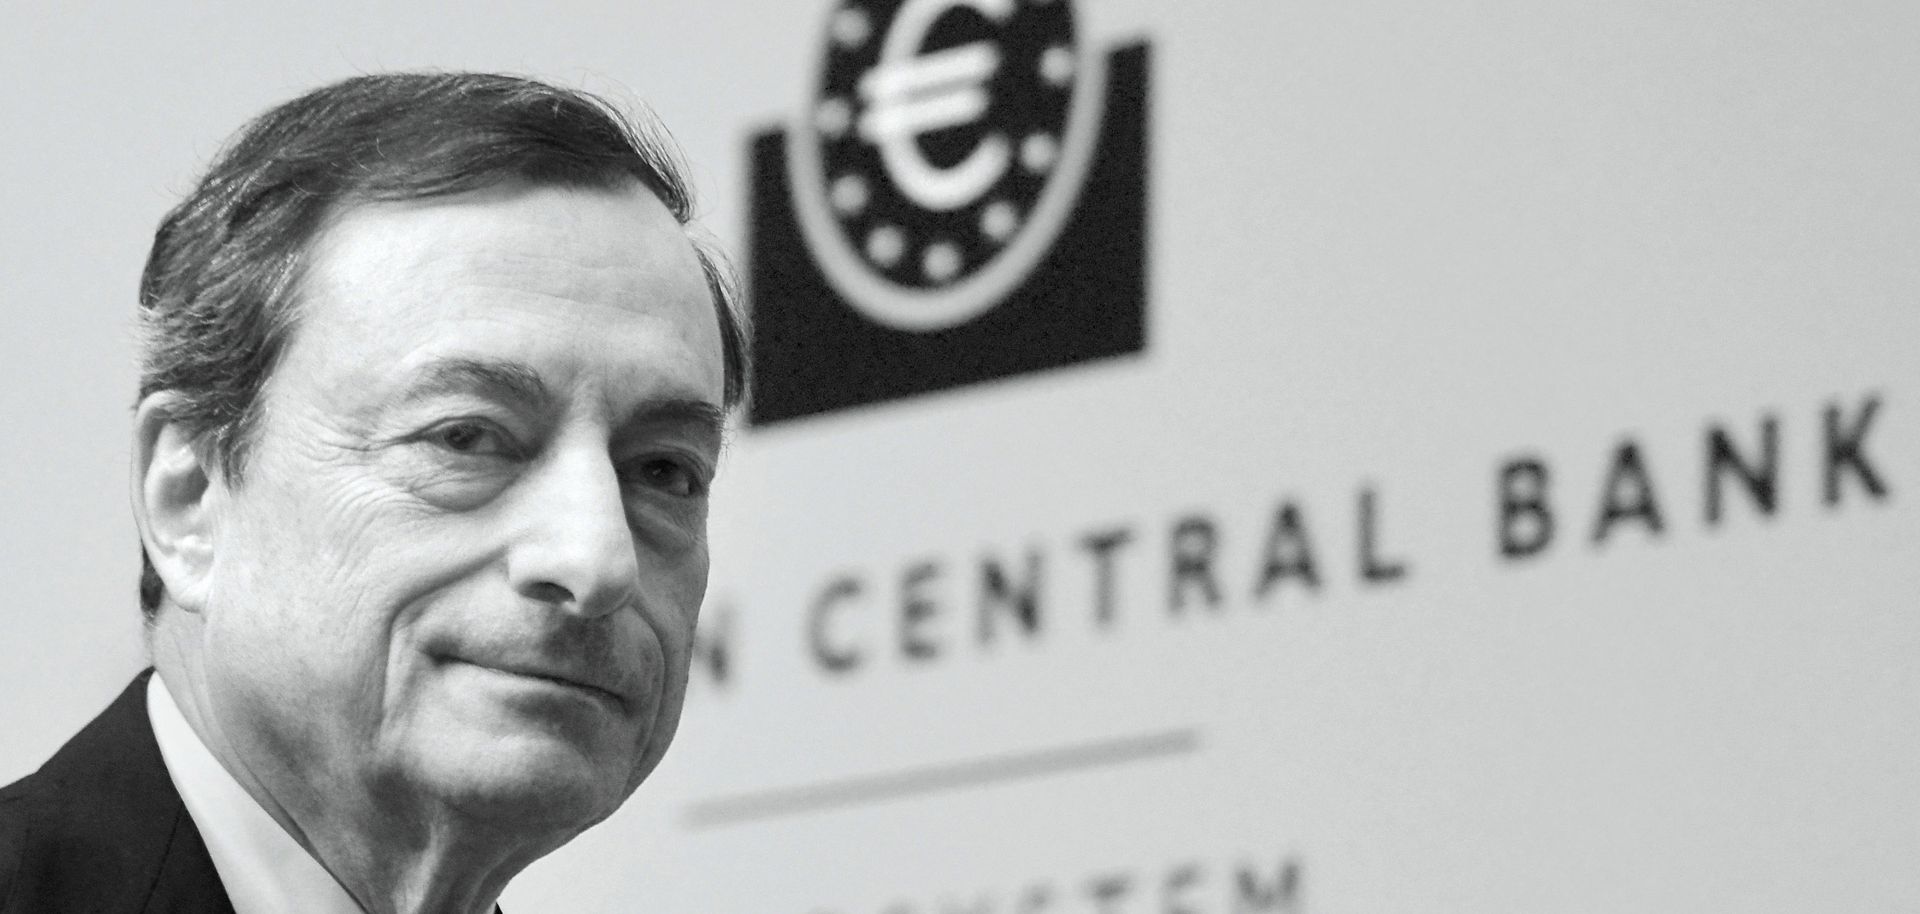 European Central Bank President Mario Draghi pictured during his first press conference following the monthly ECB board meeting in Frankfurt, Germany.